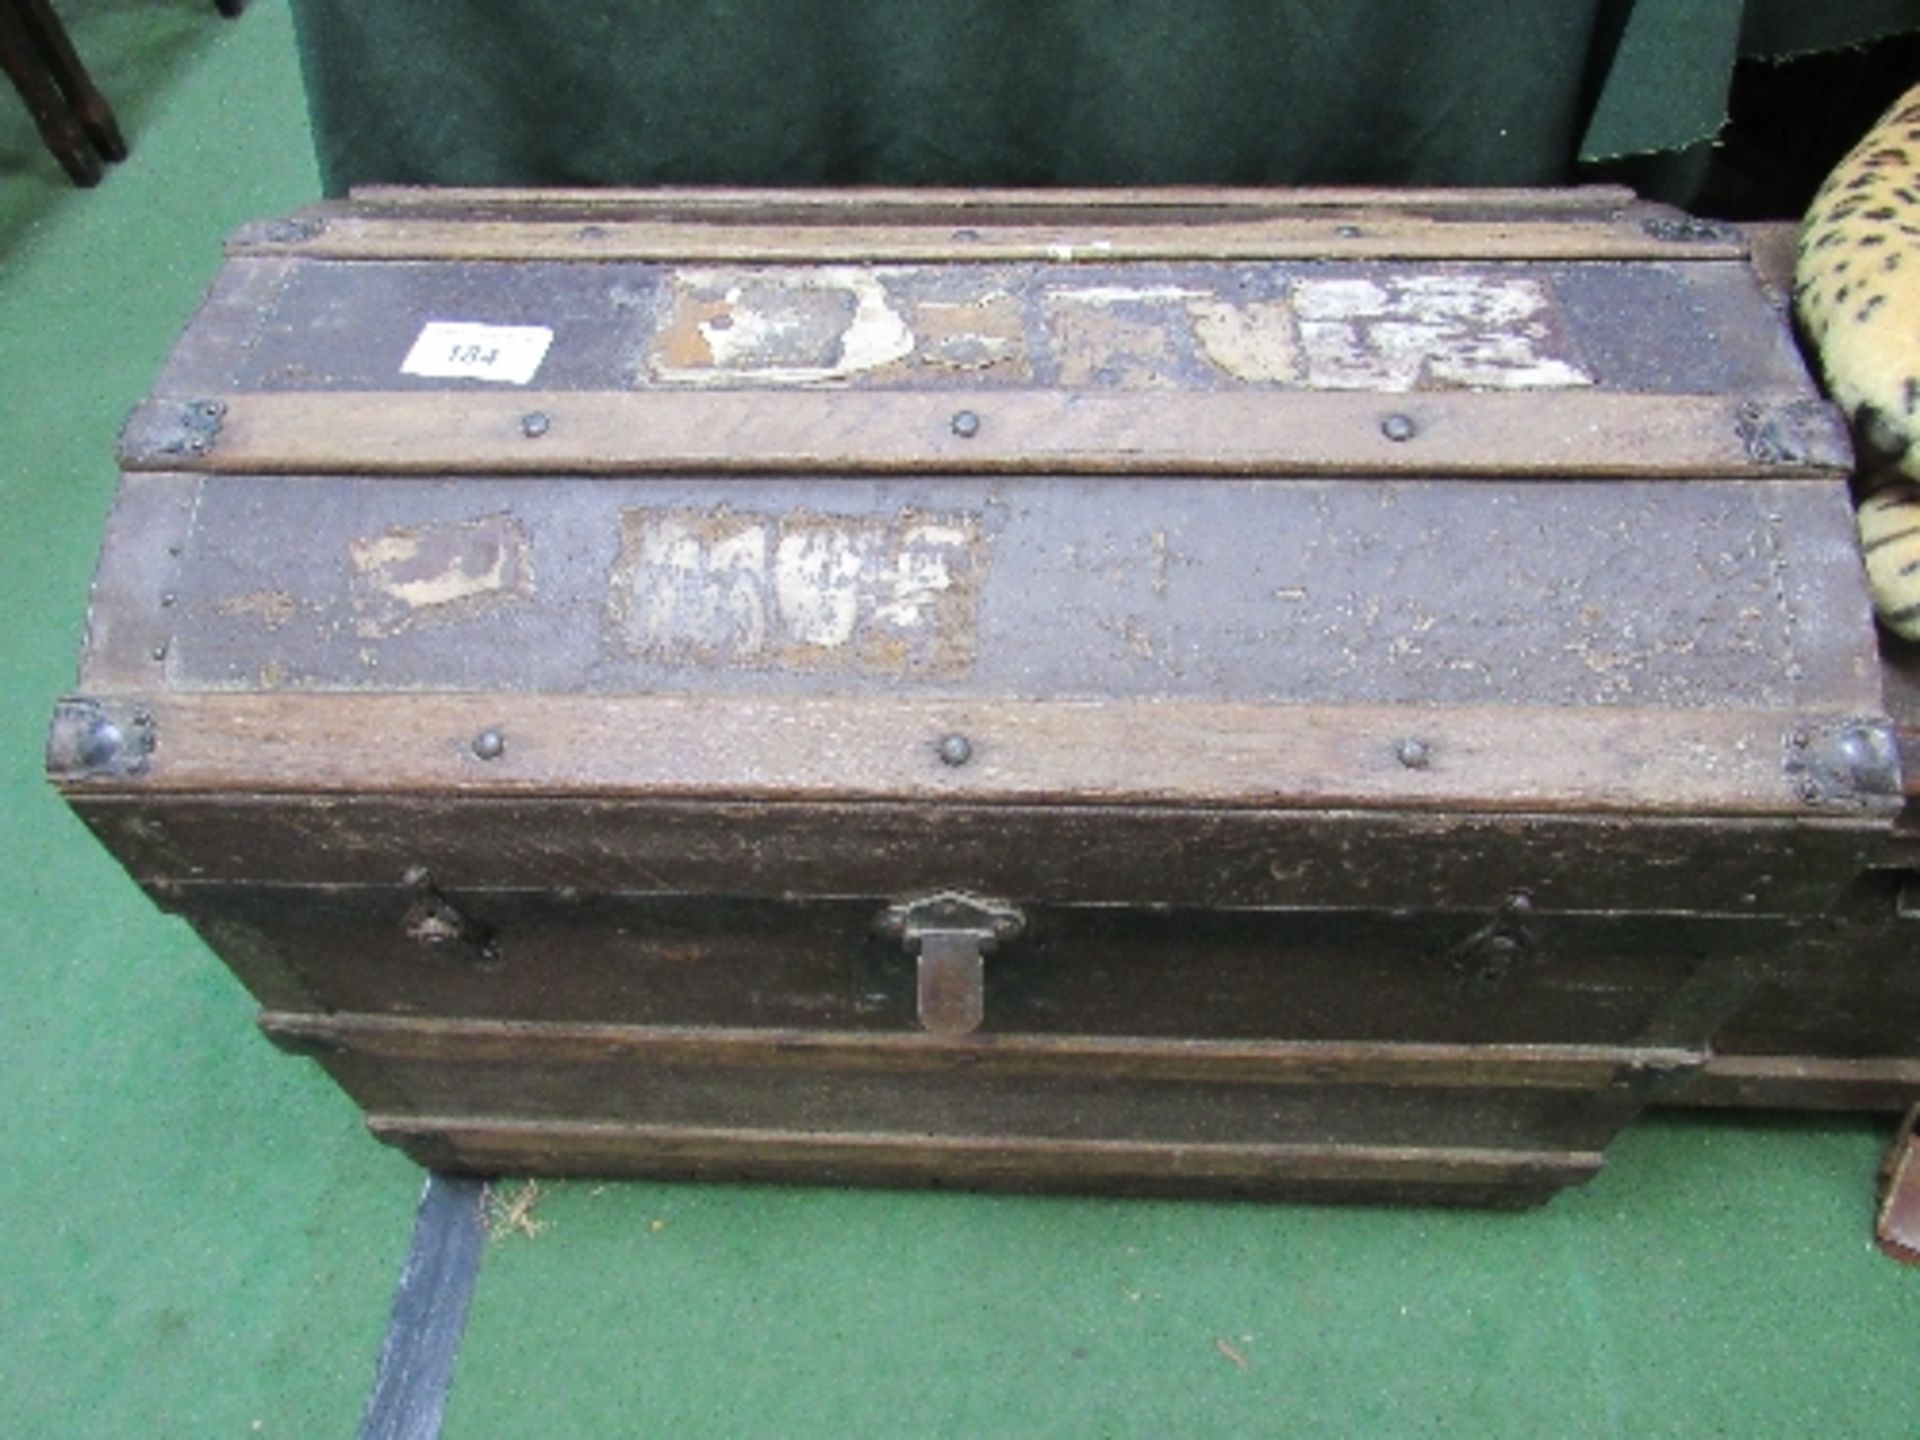 2 antique domed travel trunks, wood & leather bound with brass & bronze fittings, one with - Image 2 of 5